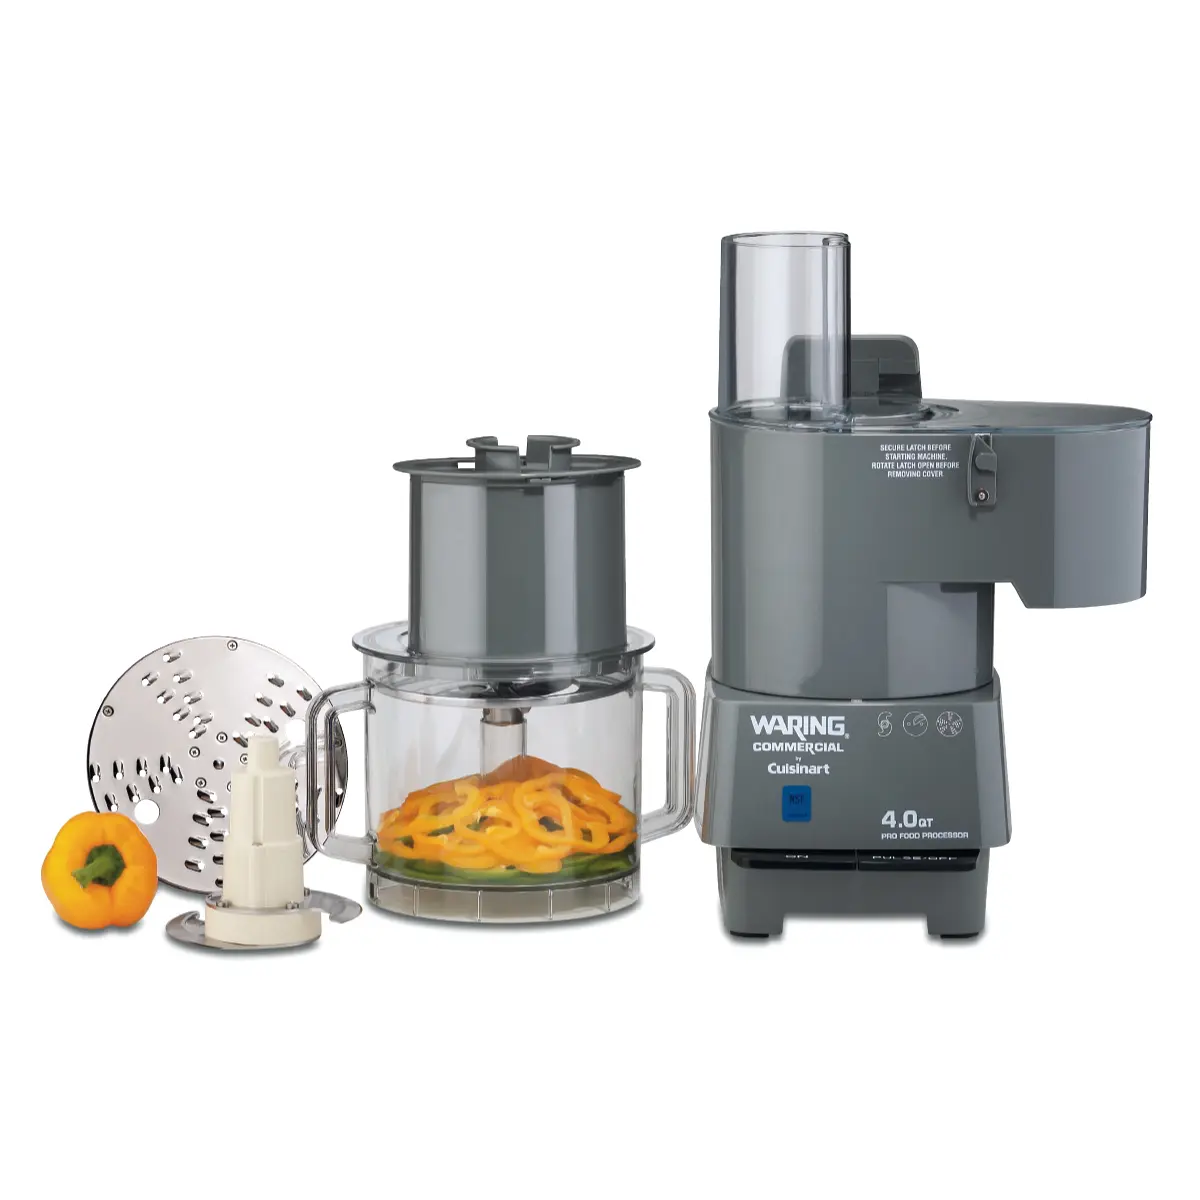 Waring Commercial Food Processors: Questions to Ask When Shopping